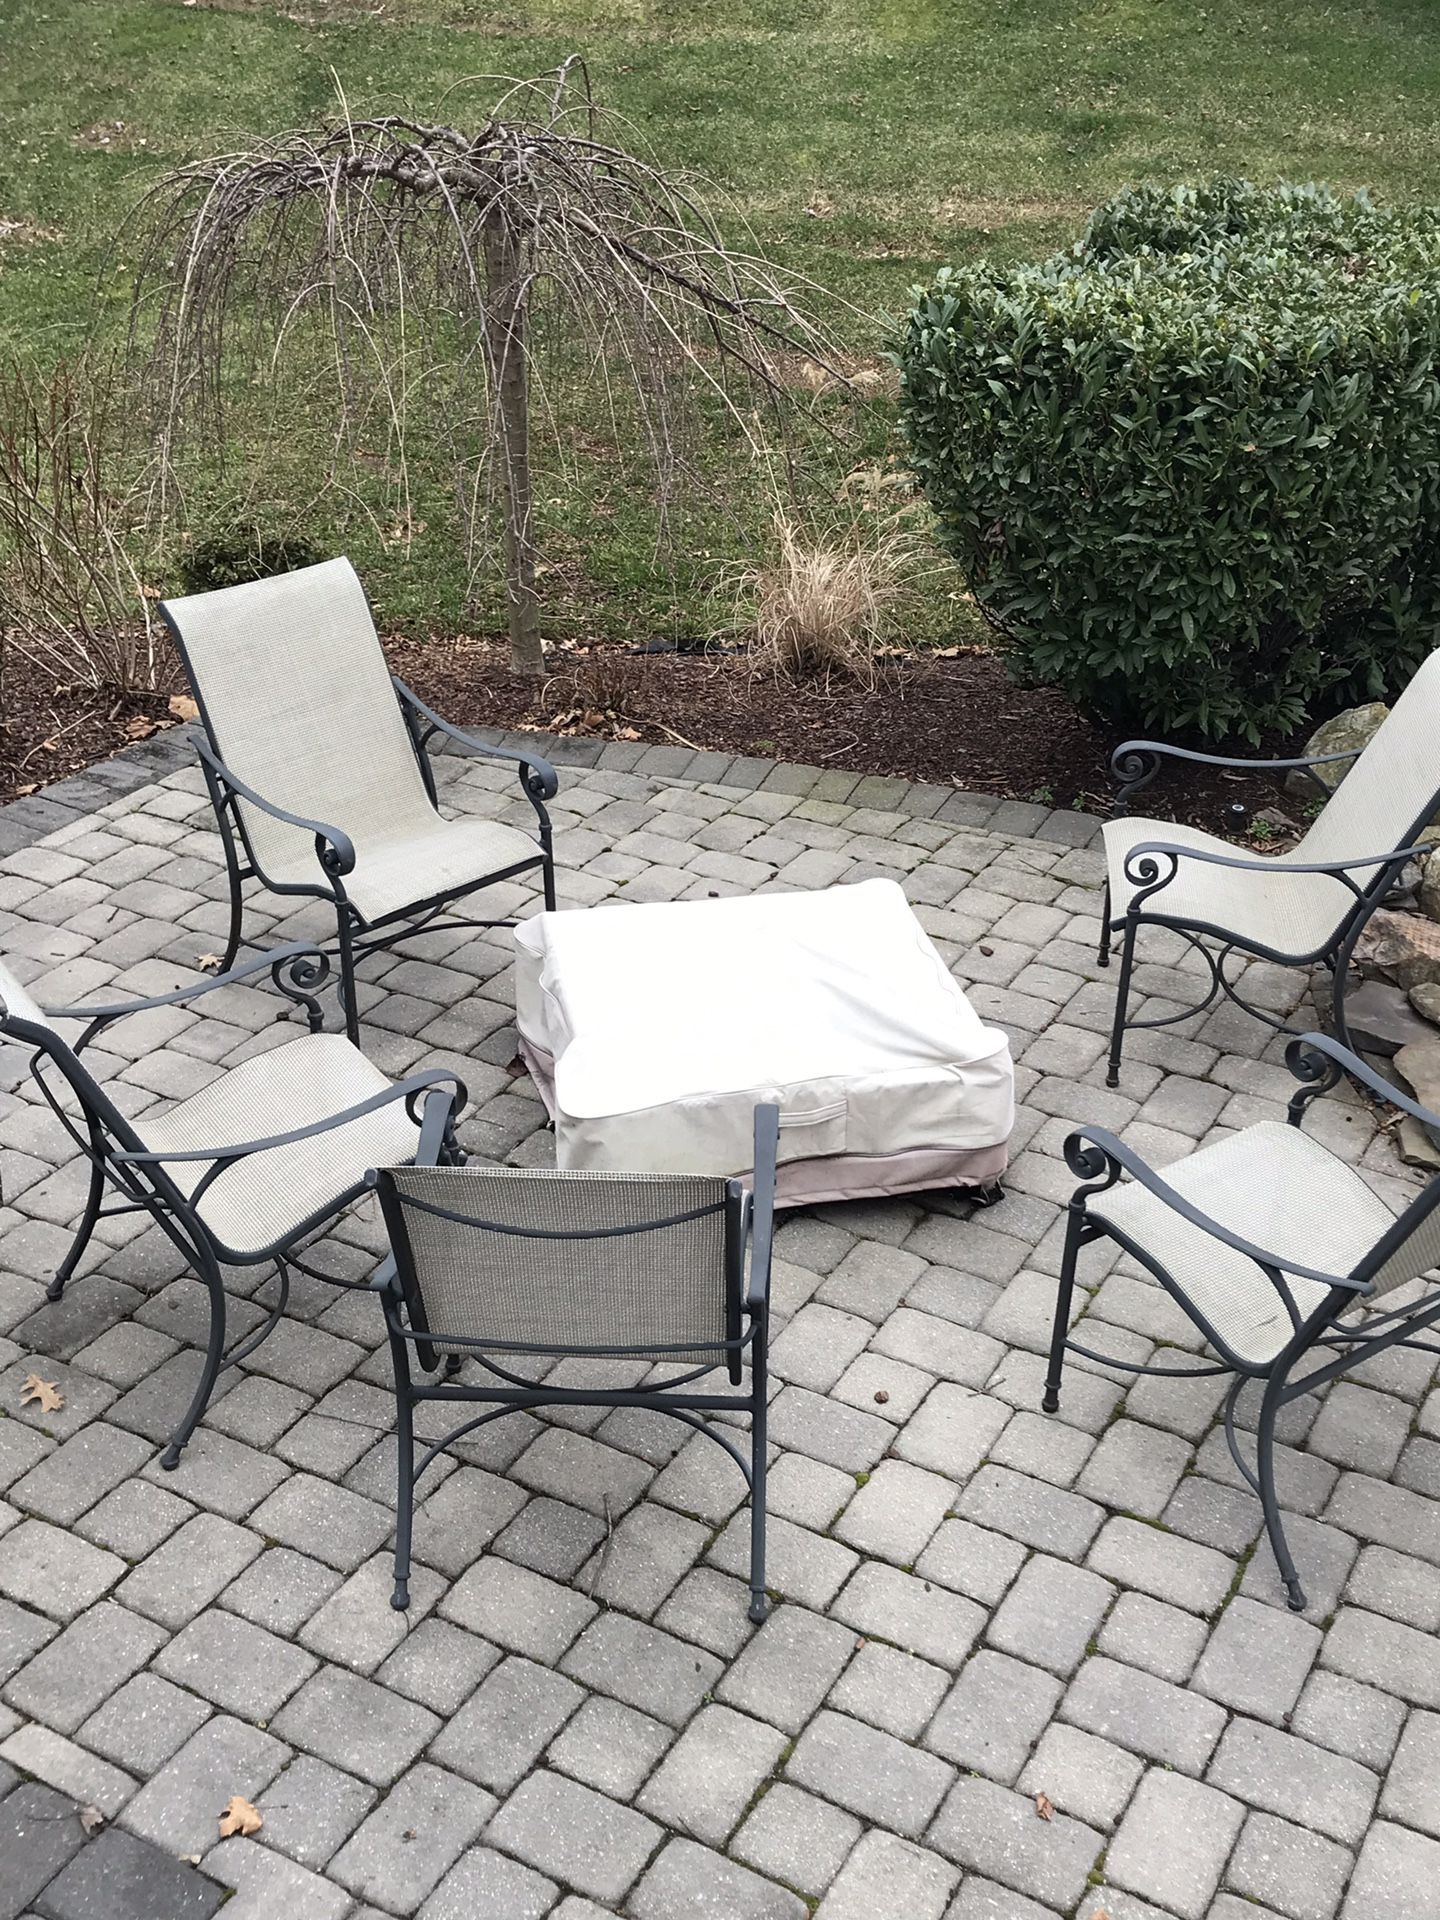 Patio set 8 chairs tables & fire pit